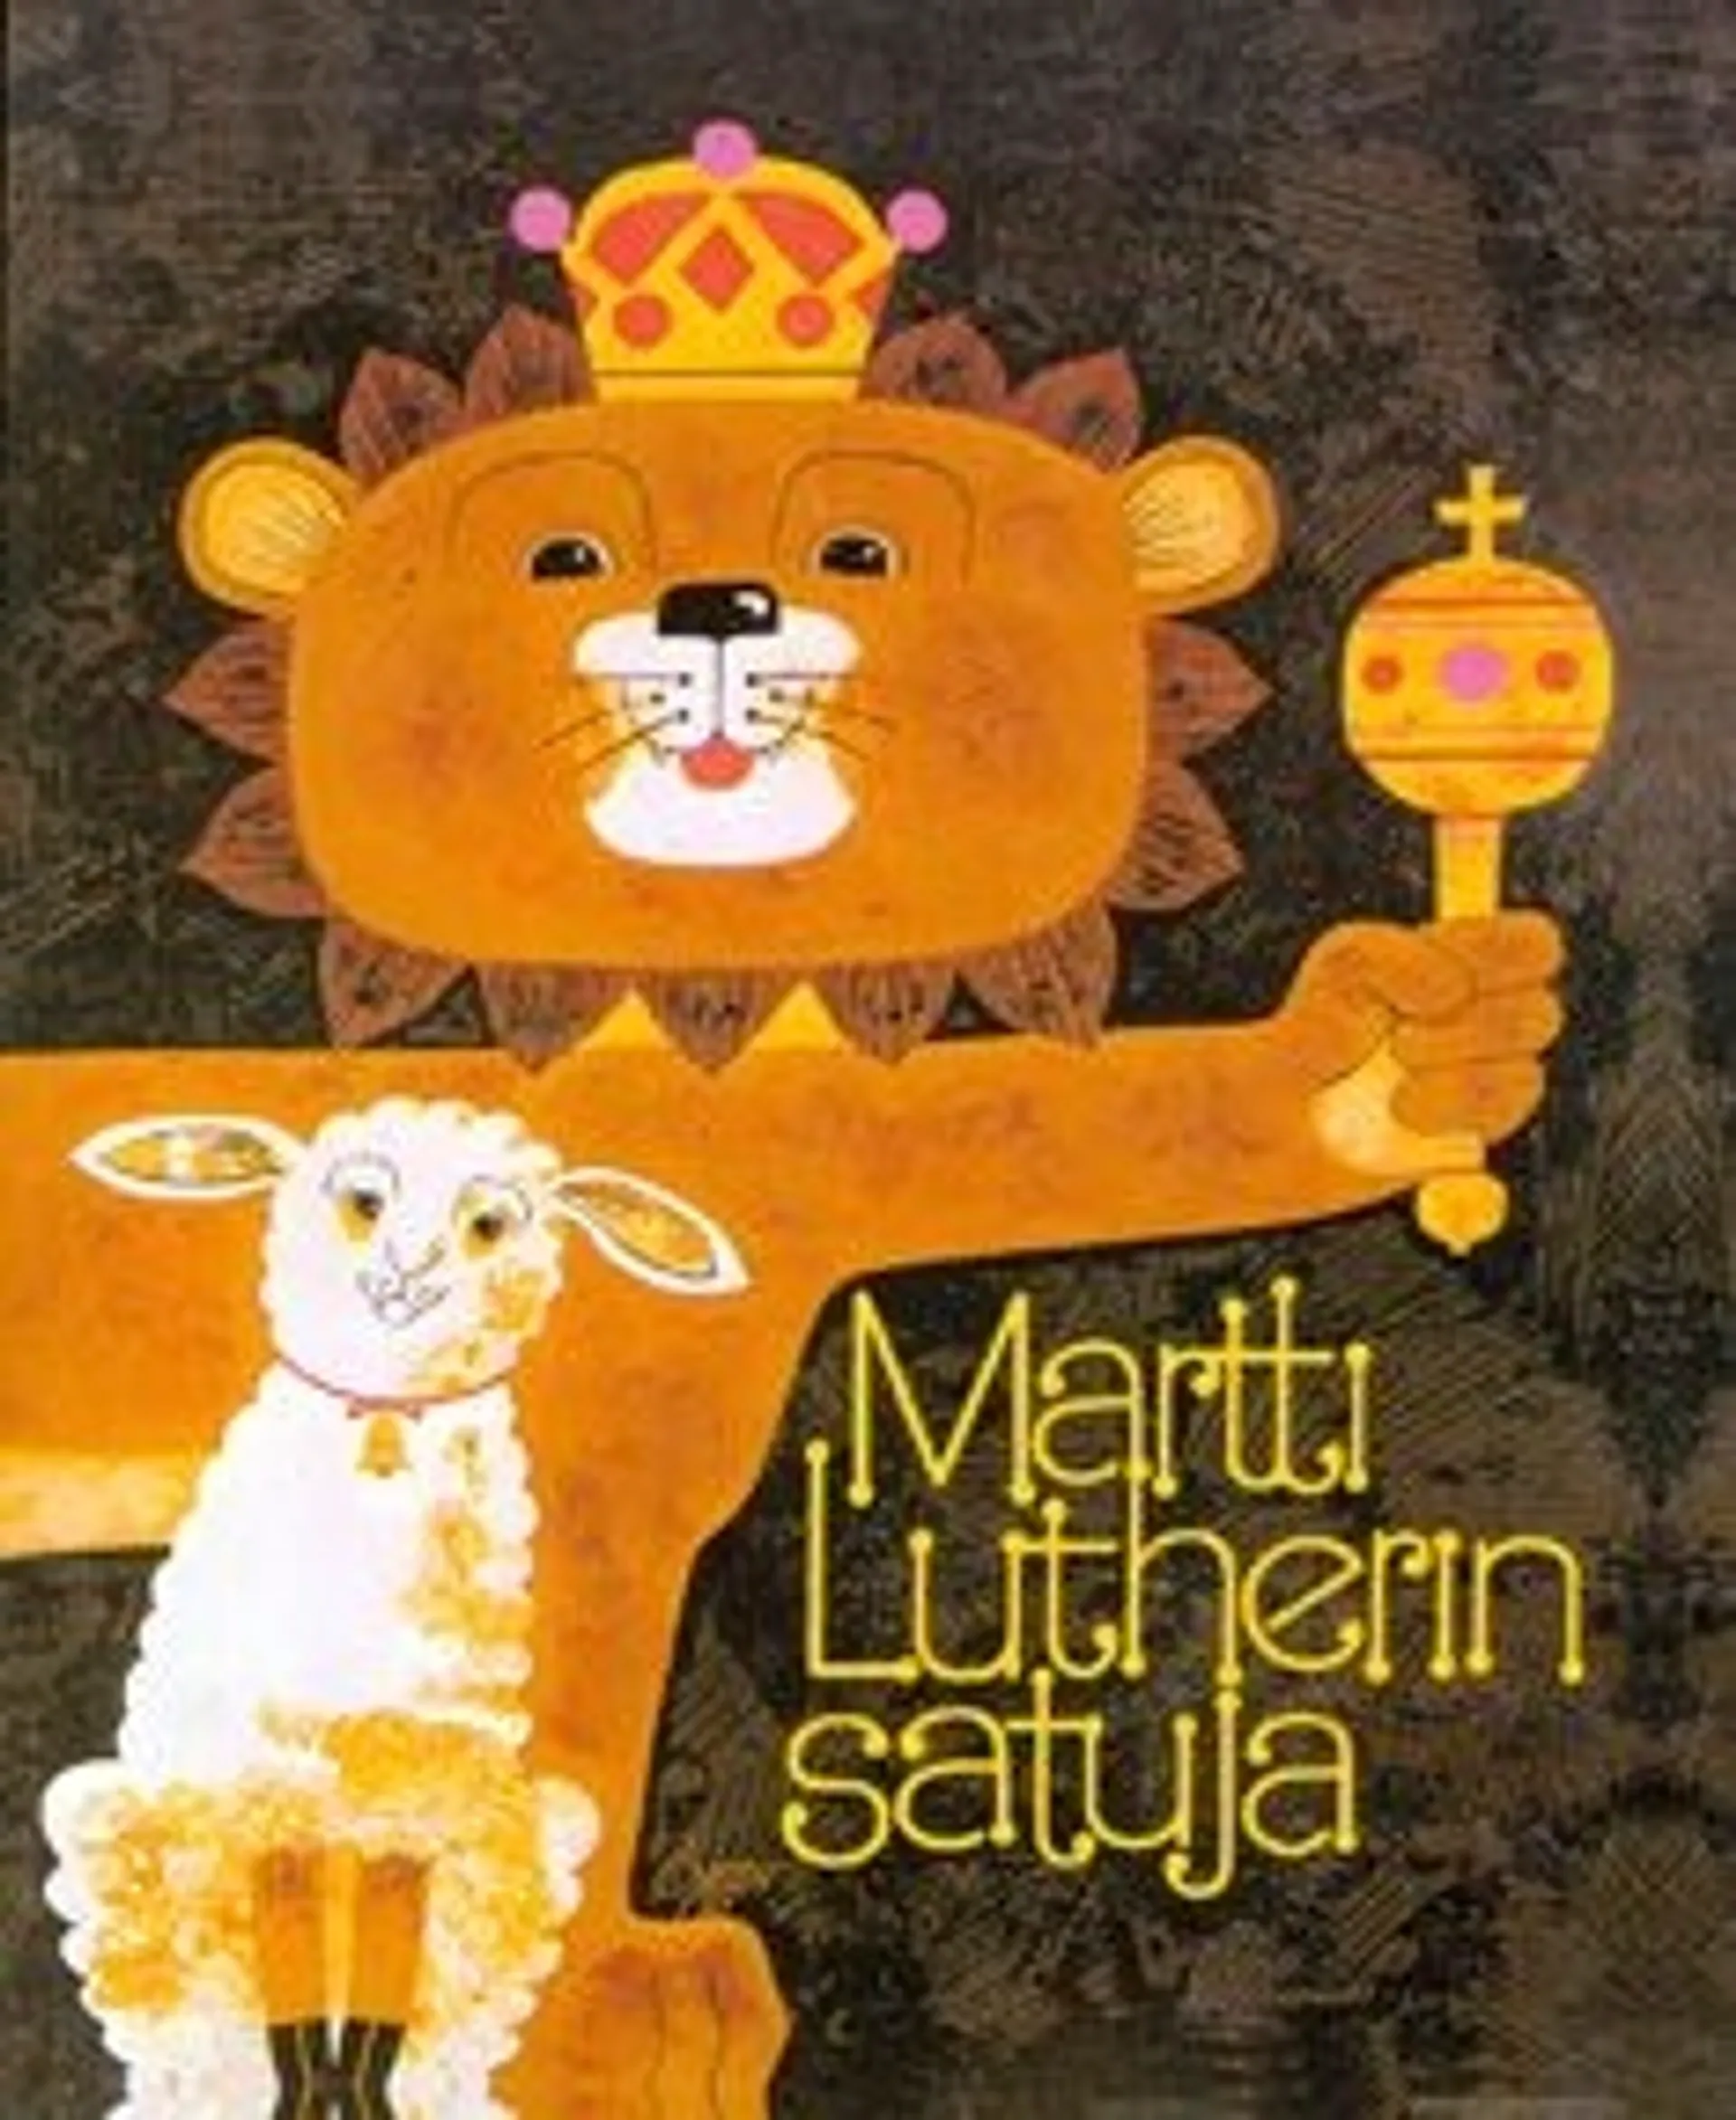 Luther, Martti Lutherin satuja